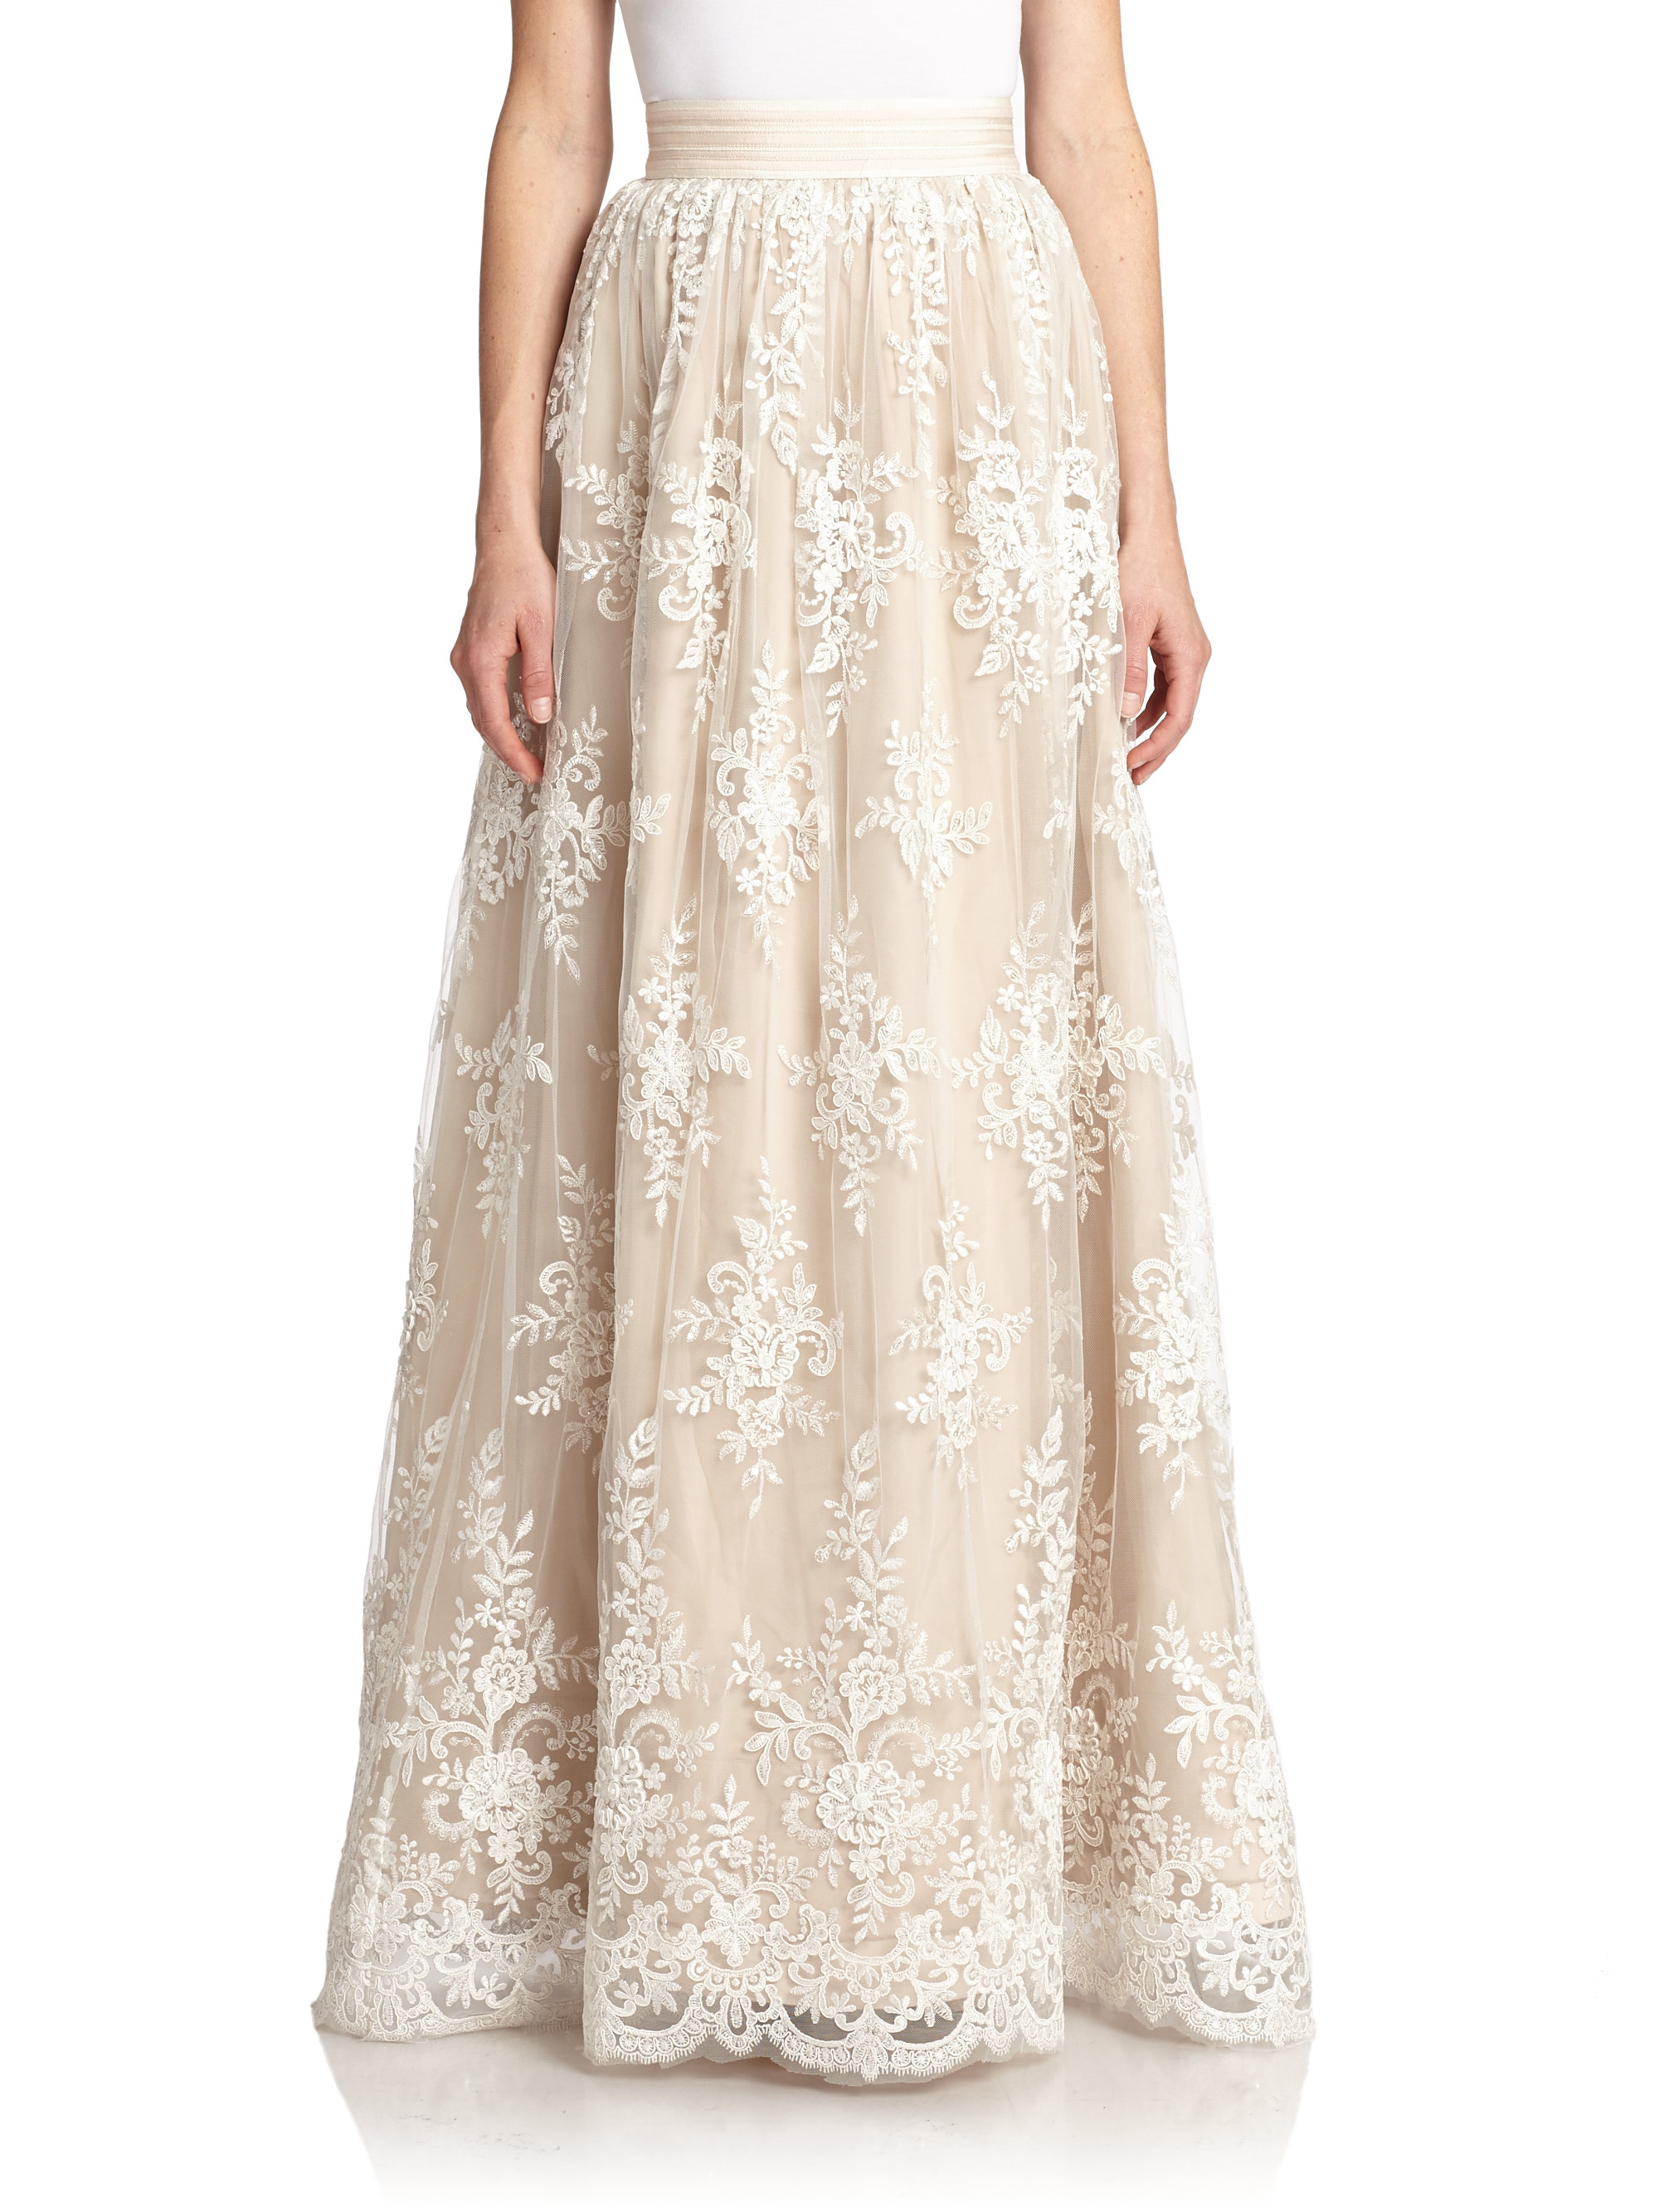 Alice + Olivia Carter Lace-overlay Maxi Skirt in White Nude (White) - Lyst